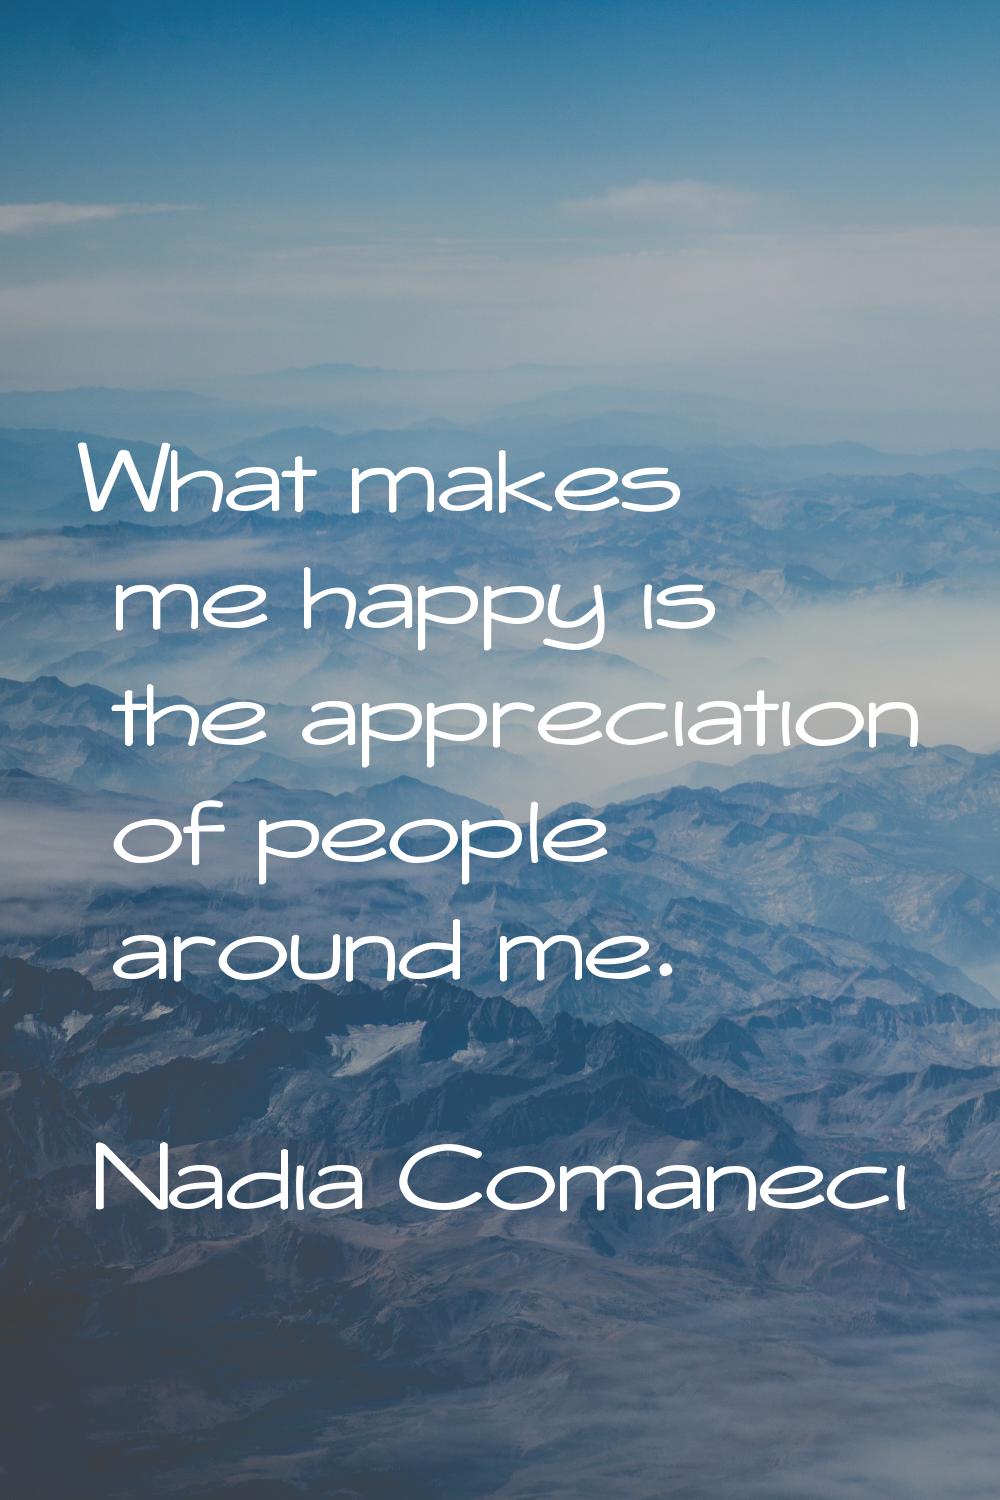 What makes me happy is the appreciation of people around me.